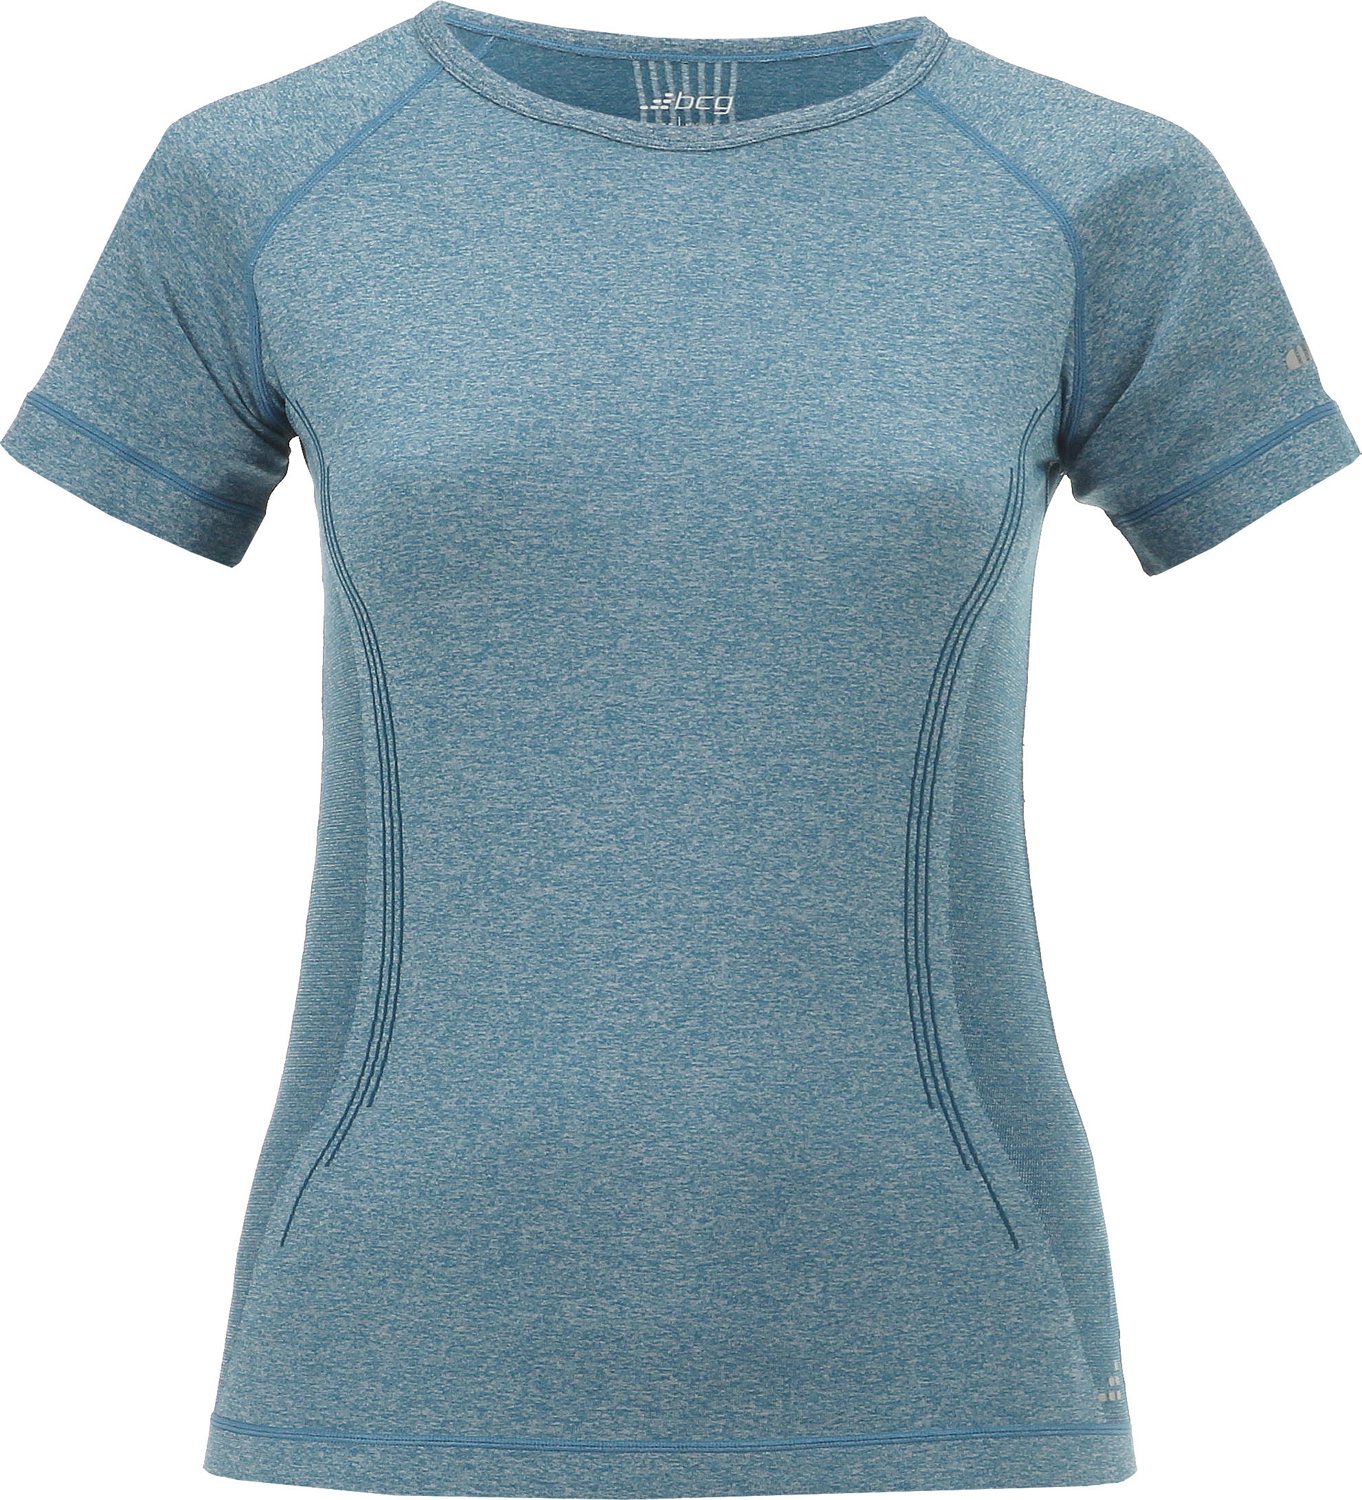 Workout Shirts for Women - Athletic Shirts | Academy